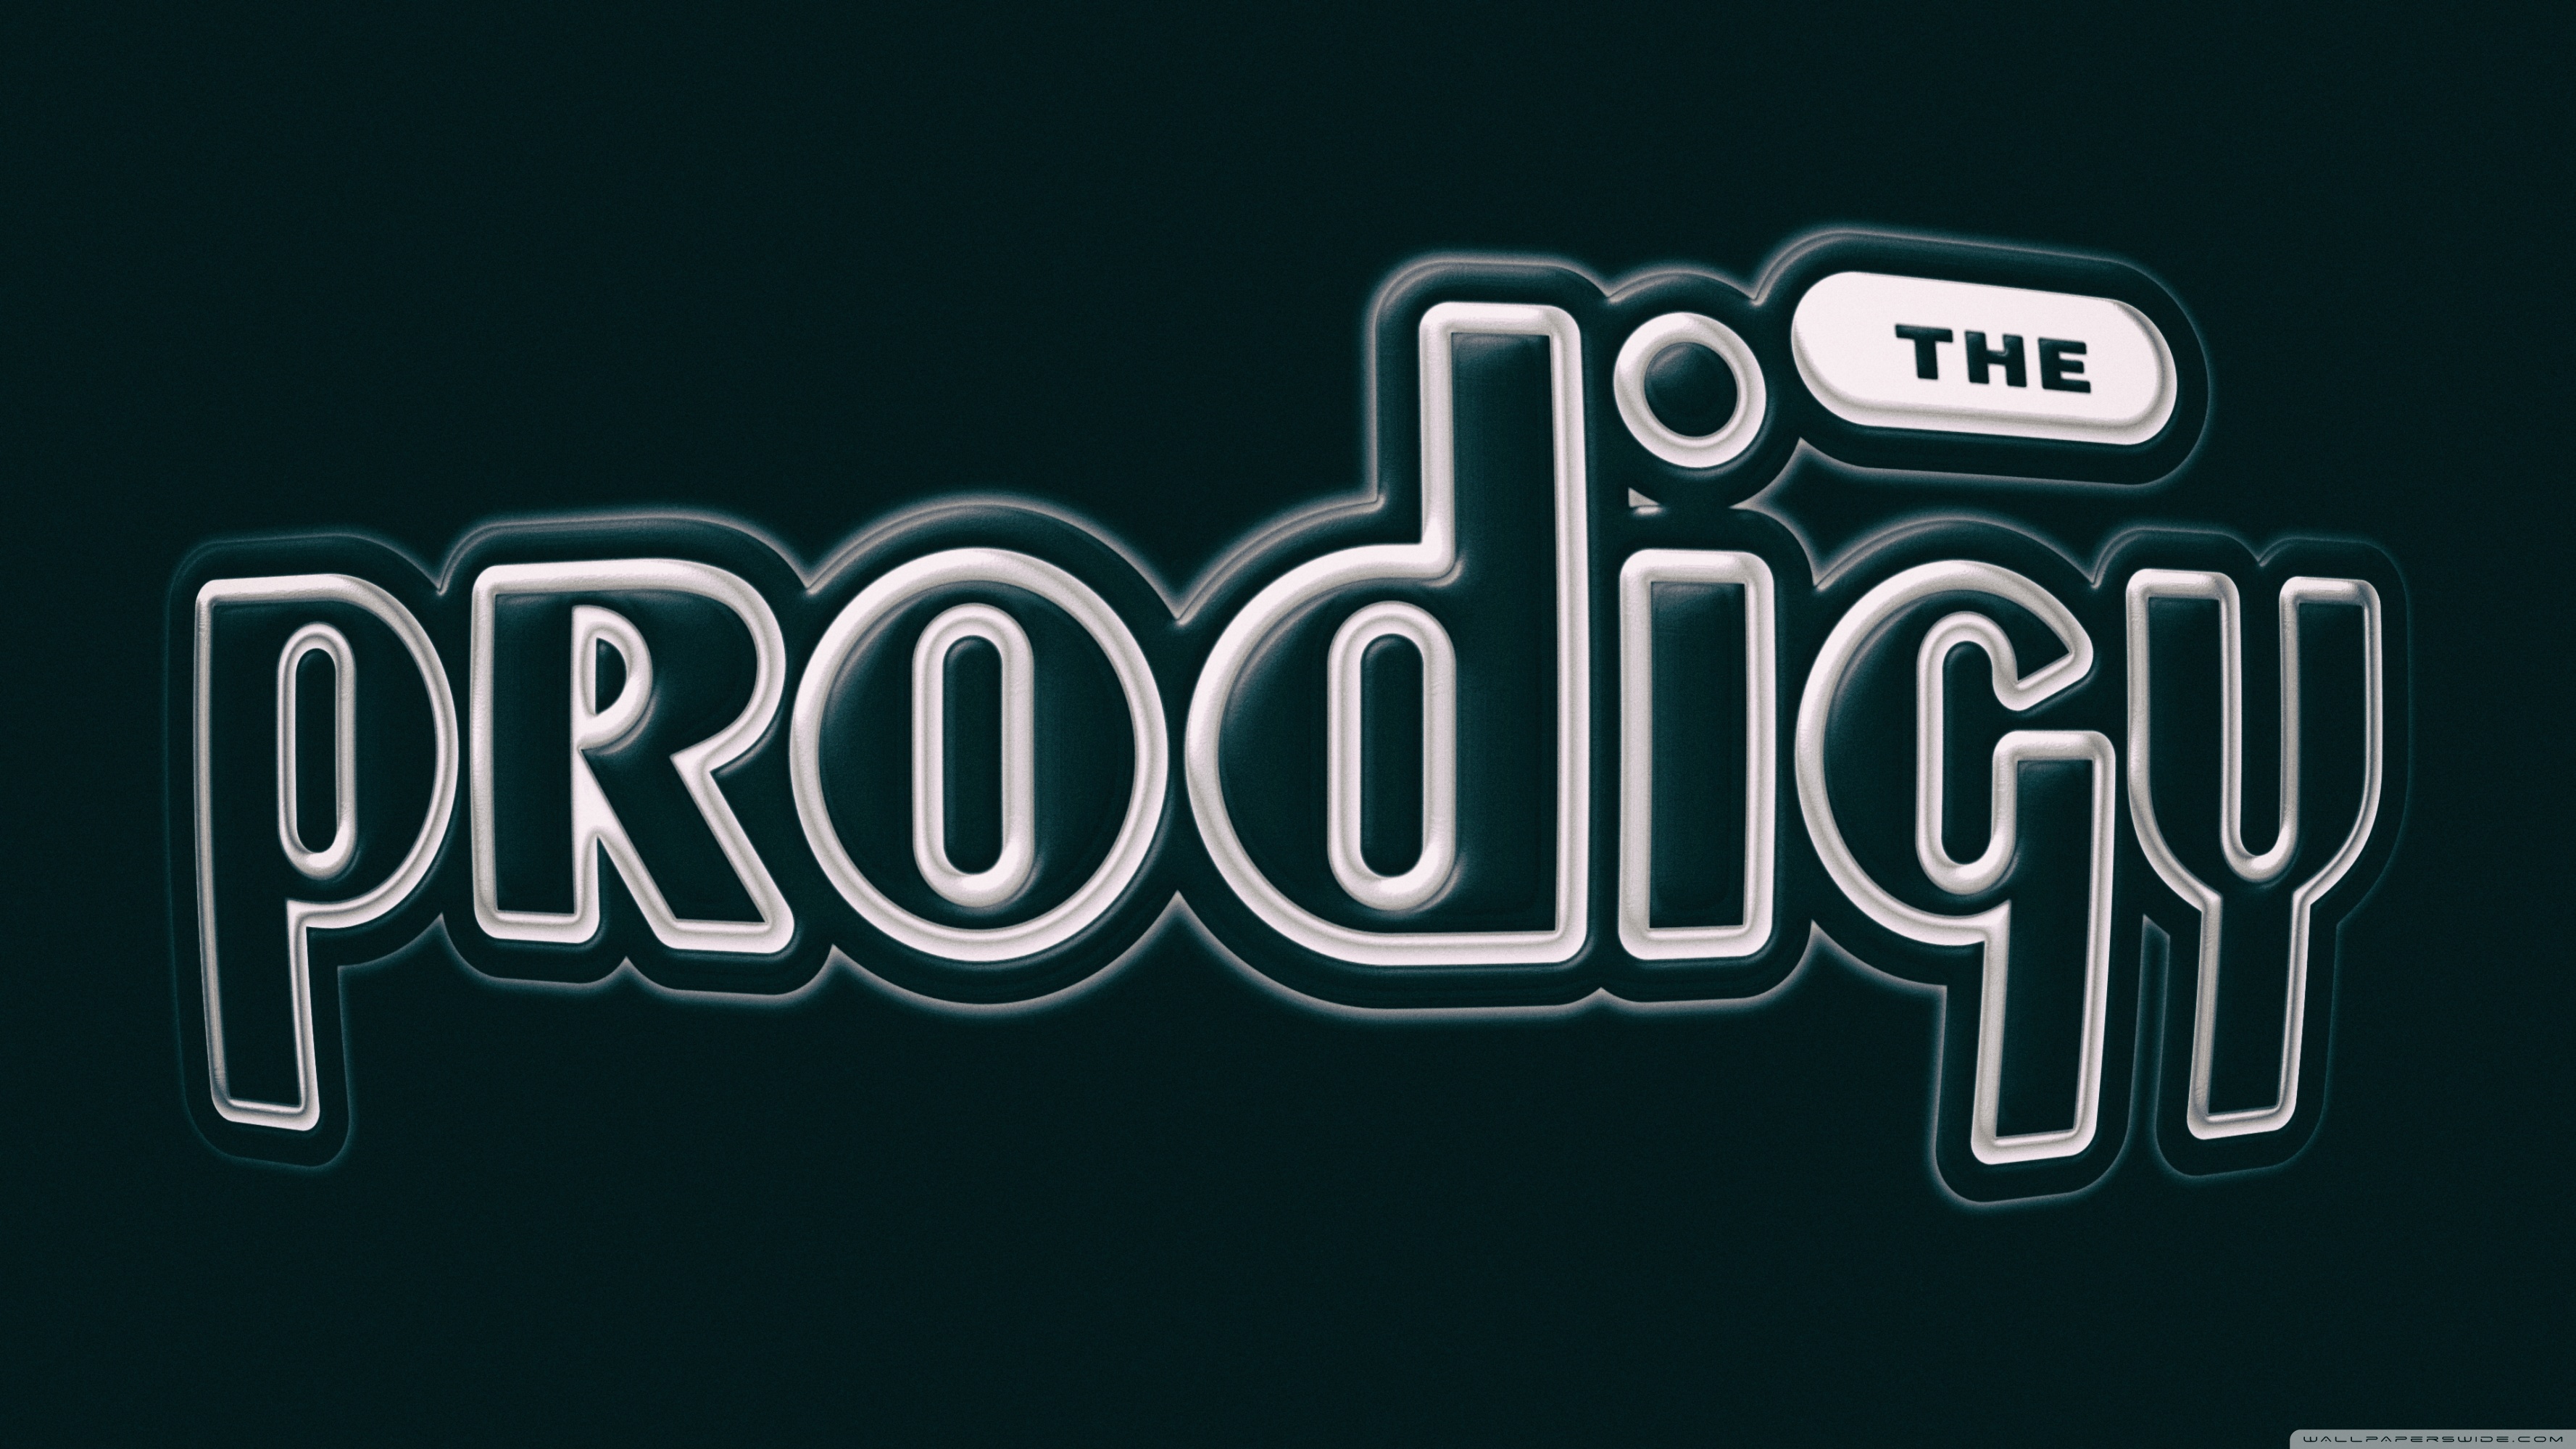 Prodigy Experience Expanded Itunes Wallpaper Teahub Io